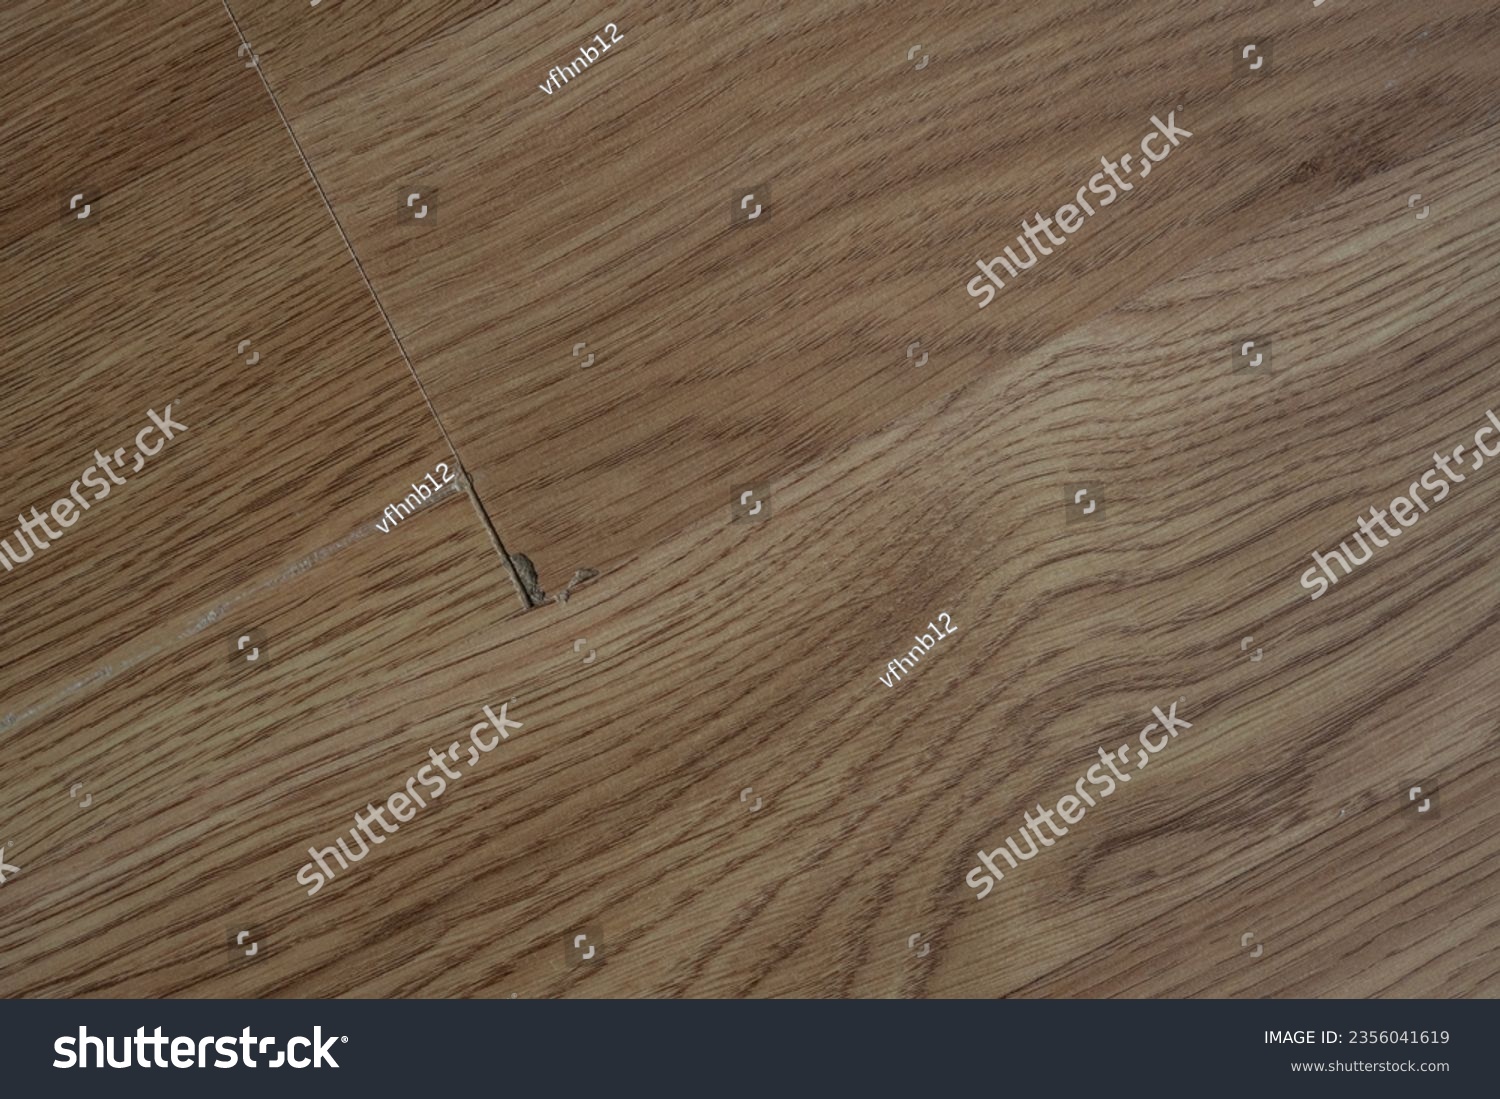 Laminate flooring with visible defects like chips, cracks, and unevenness. #2356041619